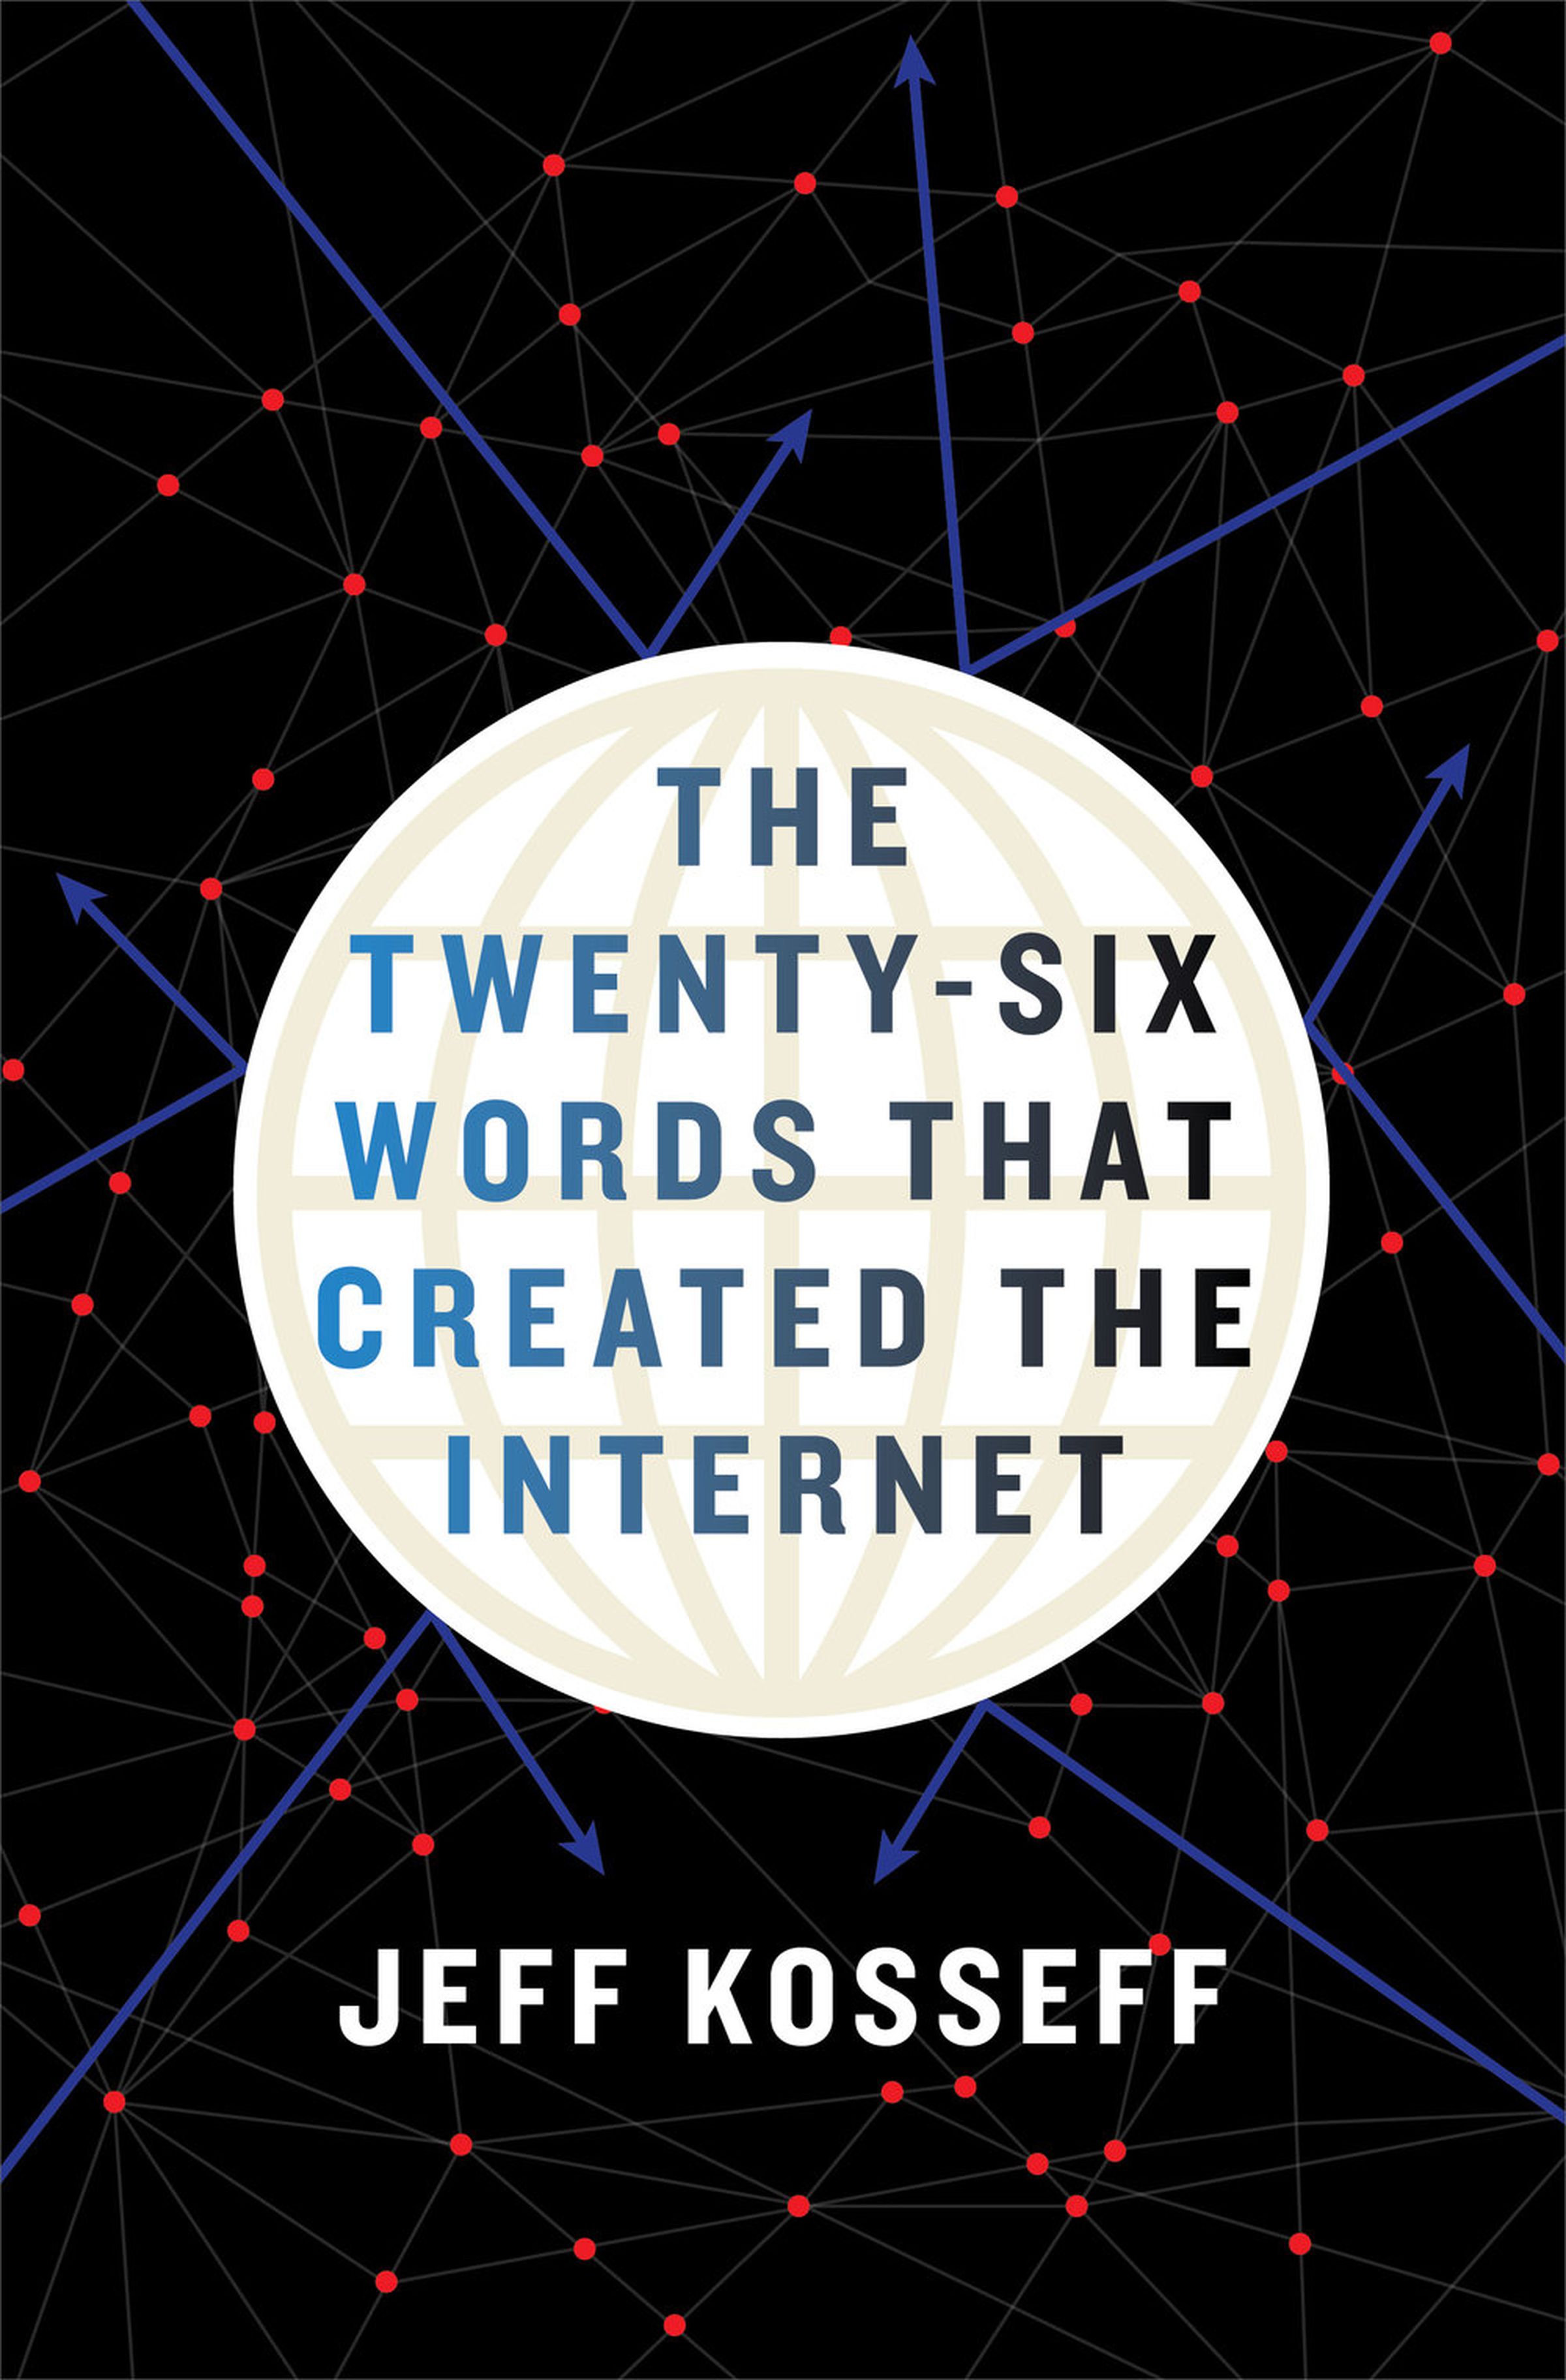 Book Cover: The Twenty-Six Words That Created The Internet